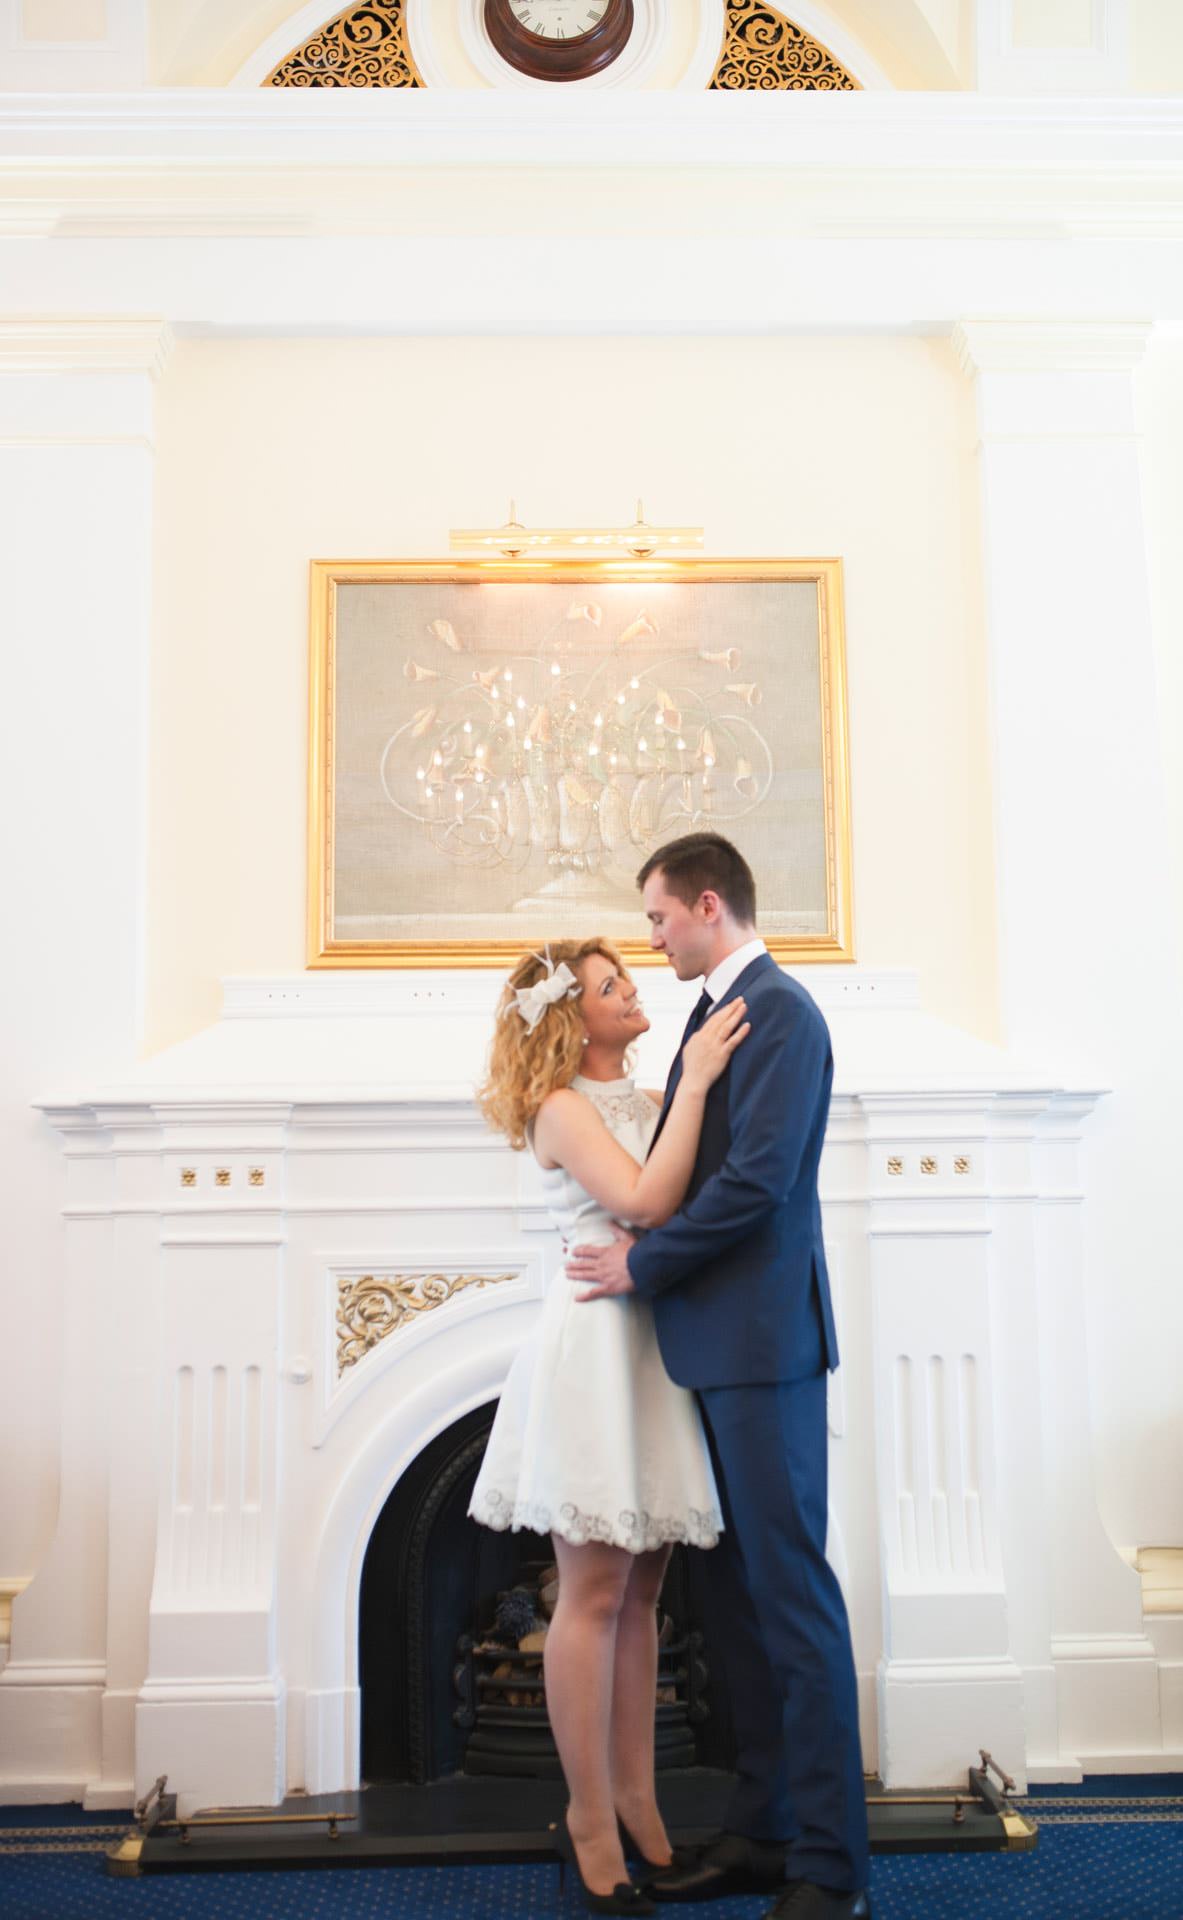 Bromley on Bow Registry office, London UK Wedding photography ceremony room wioth the guest